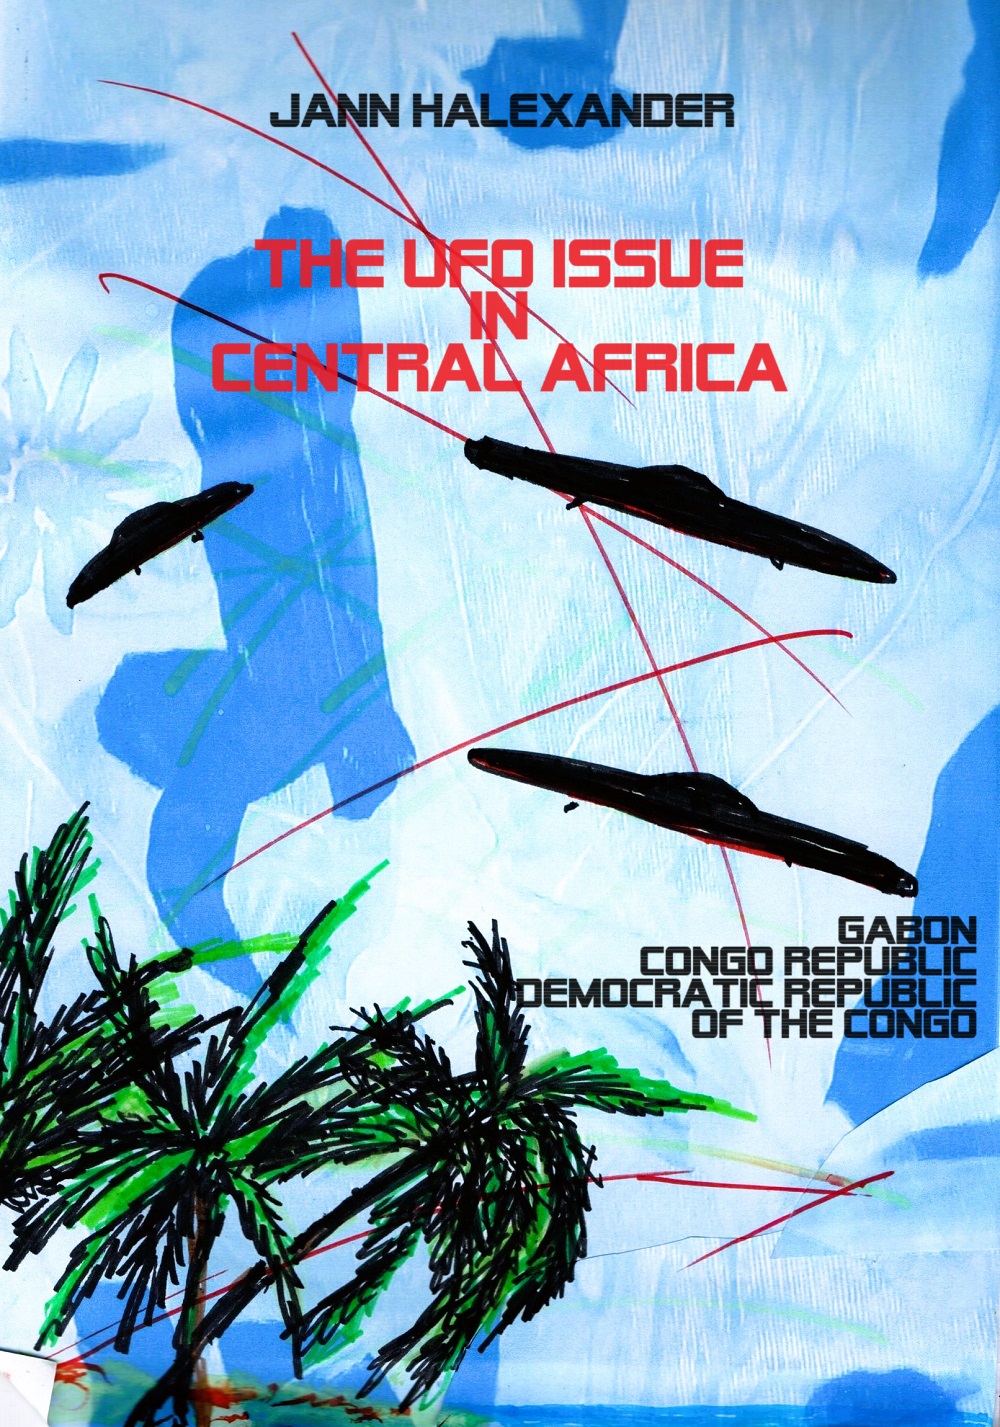 Book ‘THE UFO ISSUE IN CENTRAL AFRICA: (Gabon, Congo, Democratic Republic of Congo) by Jann Halexander